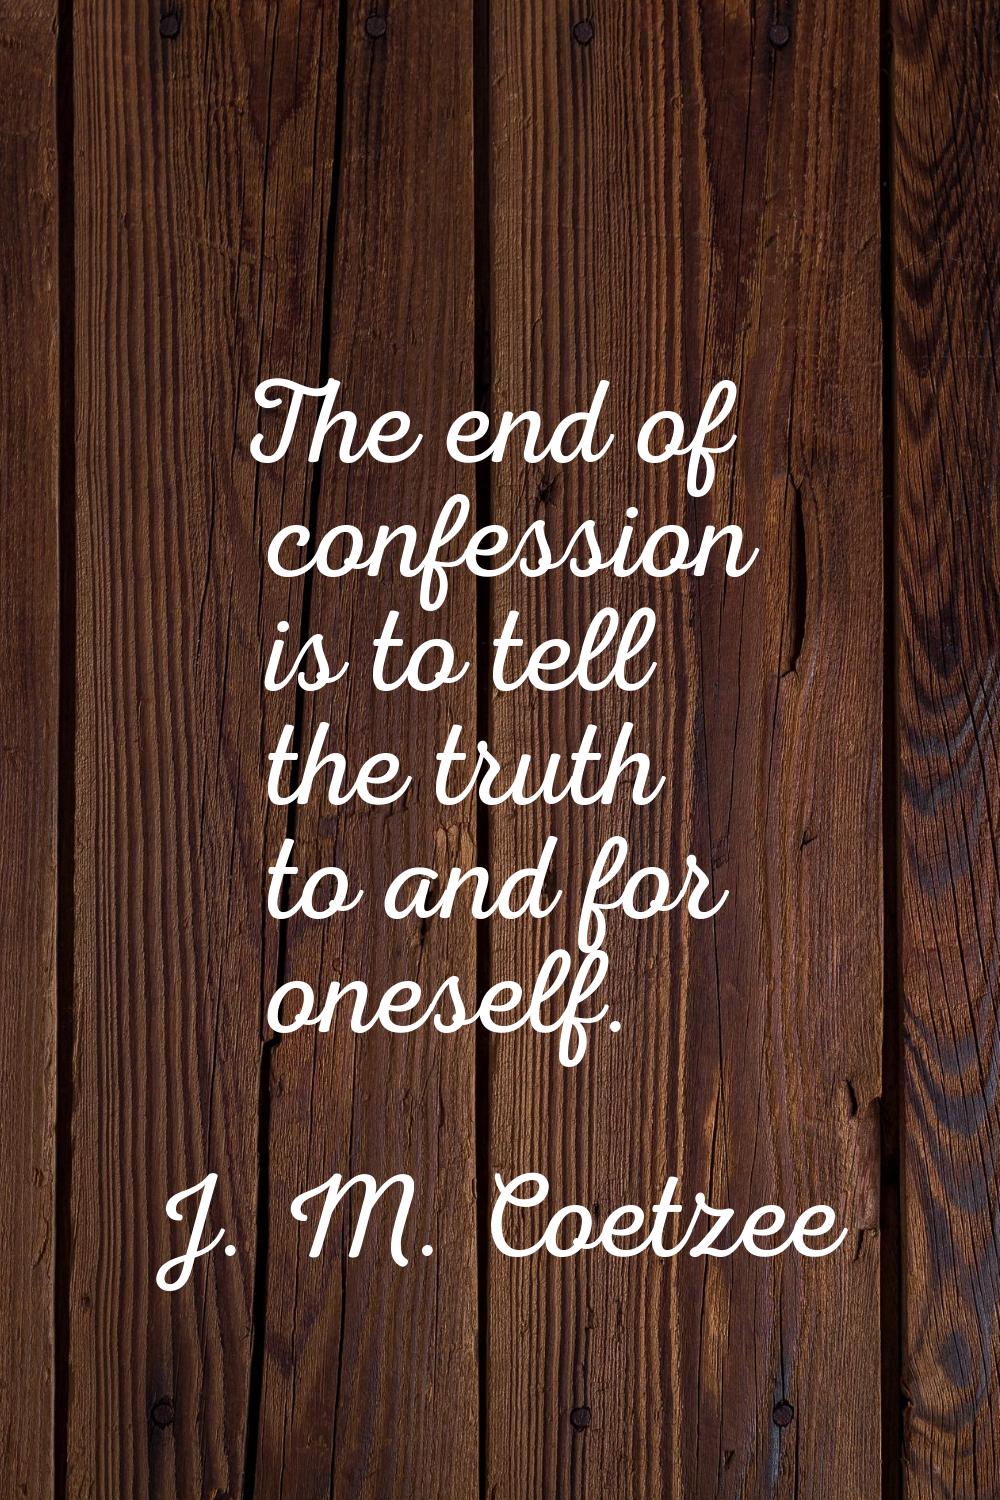 The end of confession is to tell the truth to and for oneself.